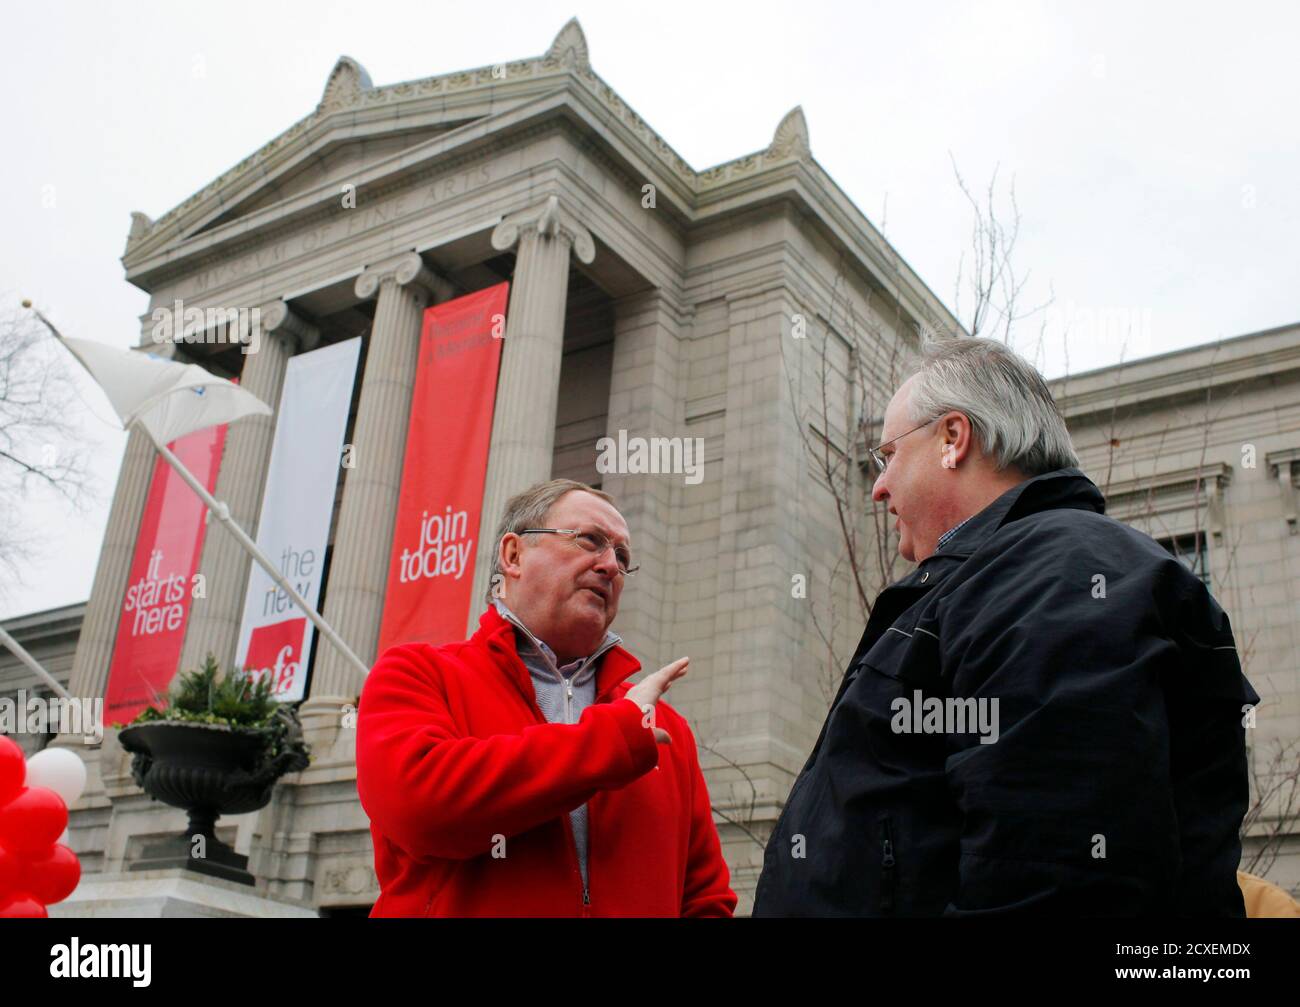 Museum of Fine Arts, Boston Director Malcolm Rogers (L) greets Steven Troxel, who travelled from Alexandria, Virginia and was the first person in line for the public opening of the museum's new Art of the Americas wing, in Boston, Massachusetts November 20, 2010. REUTERS/Brian Snyder (UNITED STATES - Tags: SOCIETY) Stock Photo